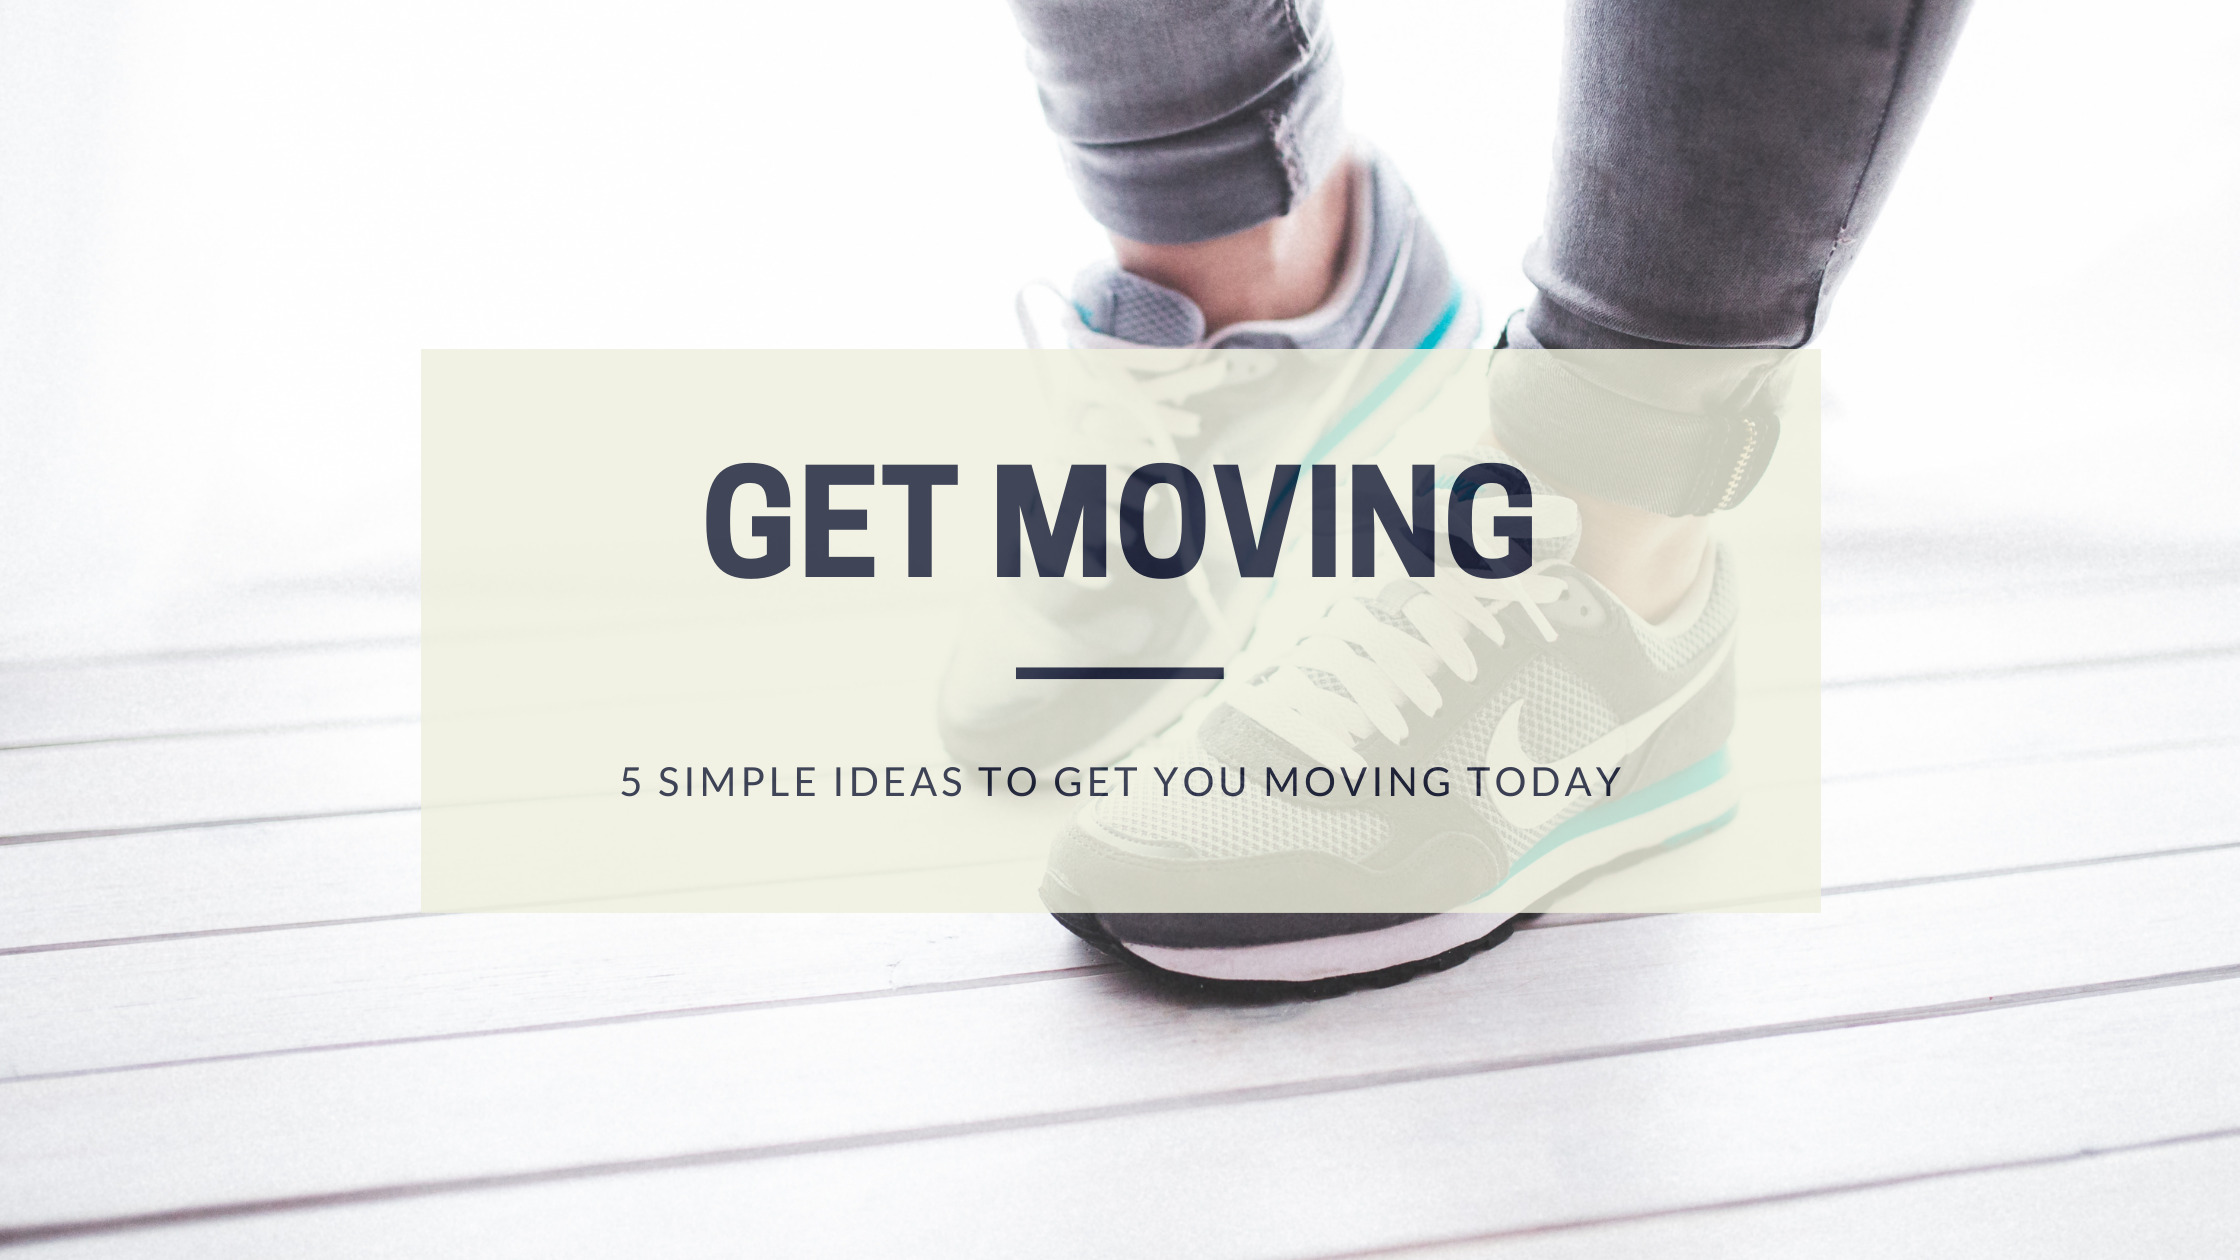 5 Simple Ideas to Get You Moving Today